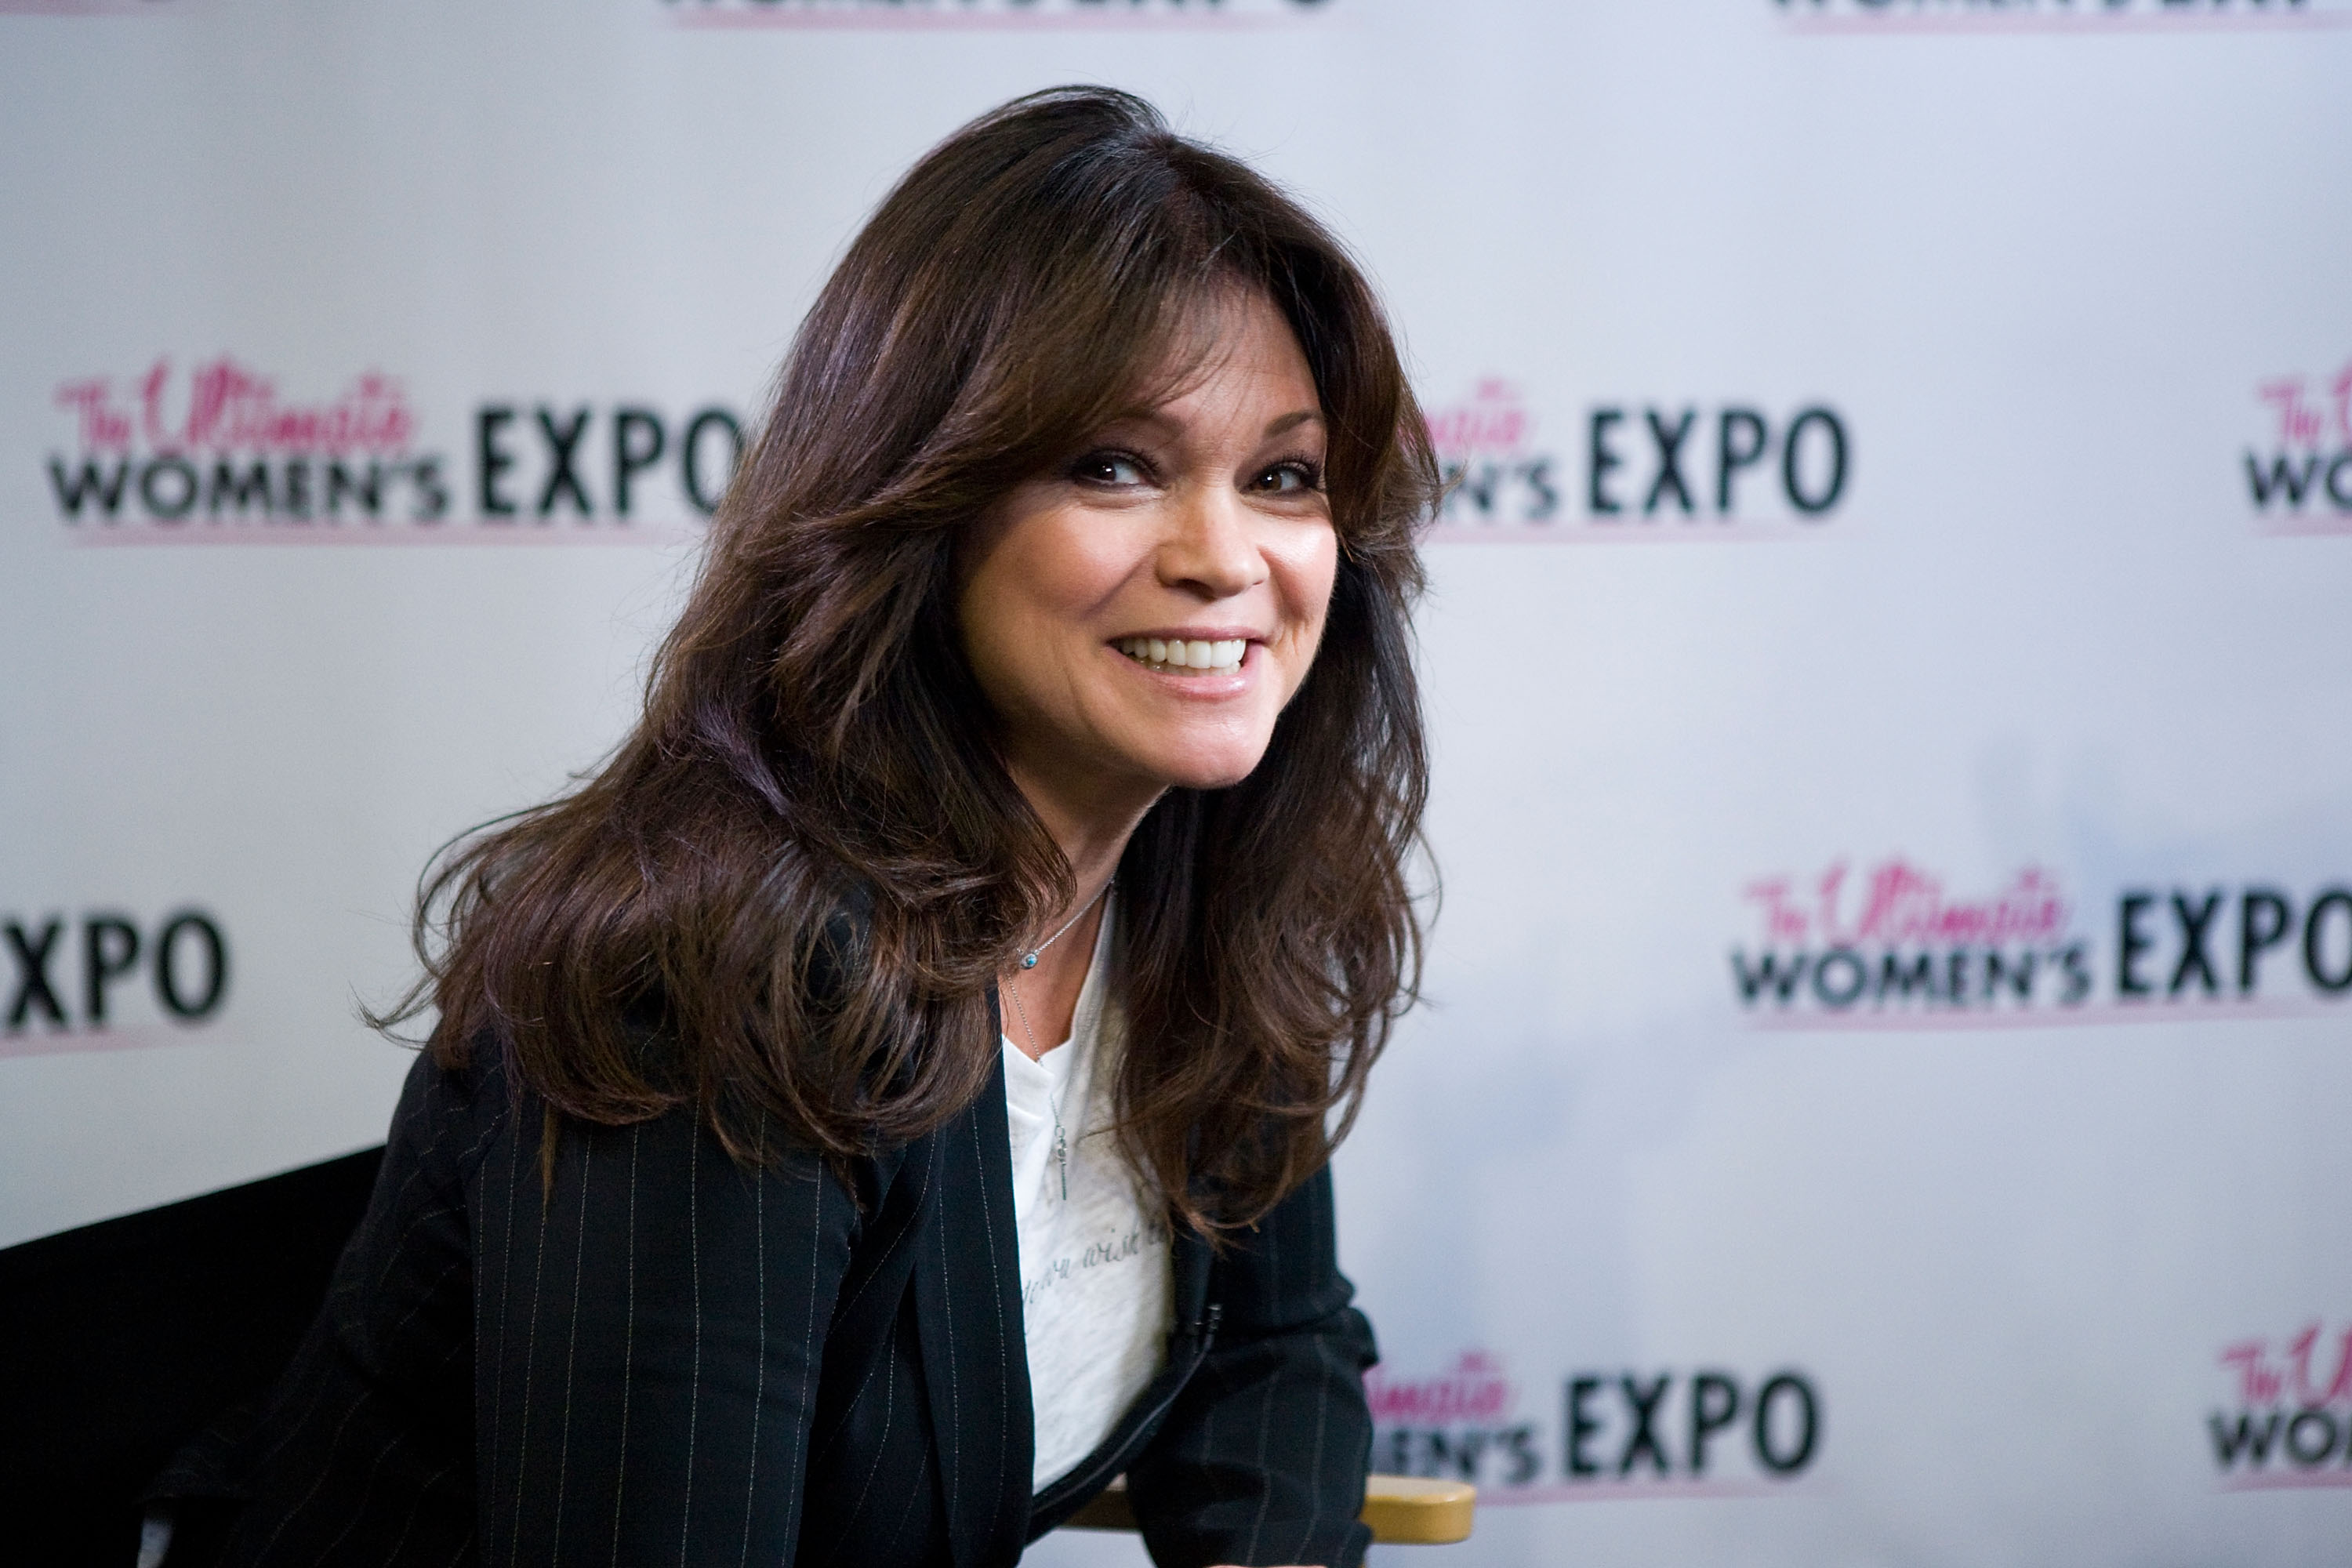 Food Network host Valerie Bertinelli smiles at the camera in 2012